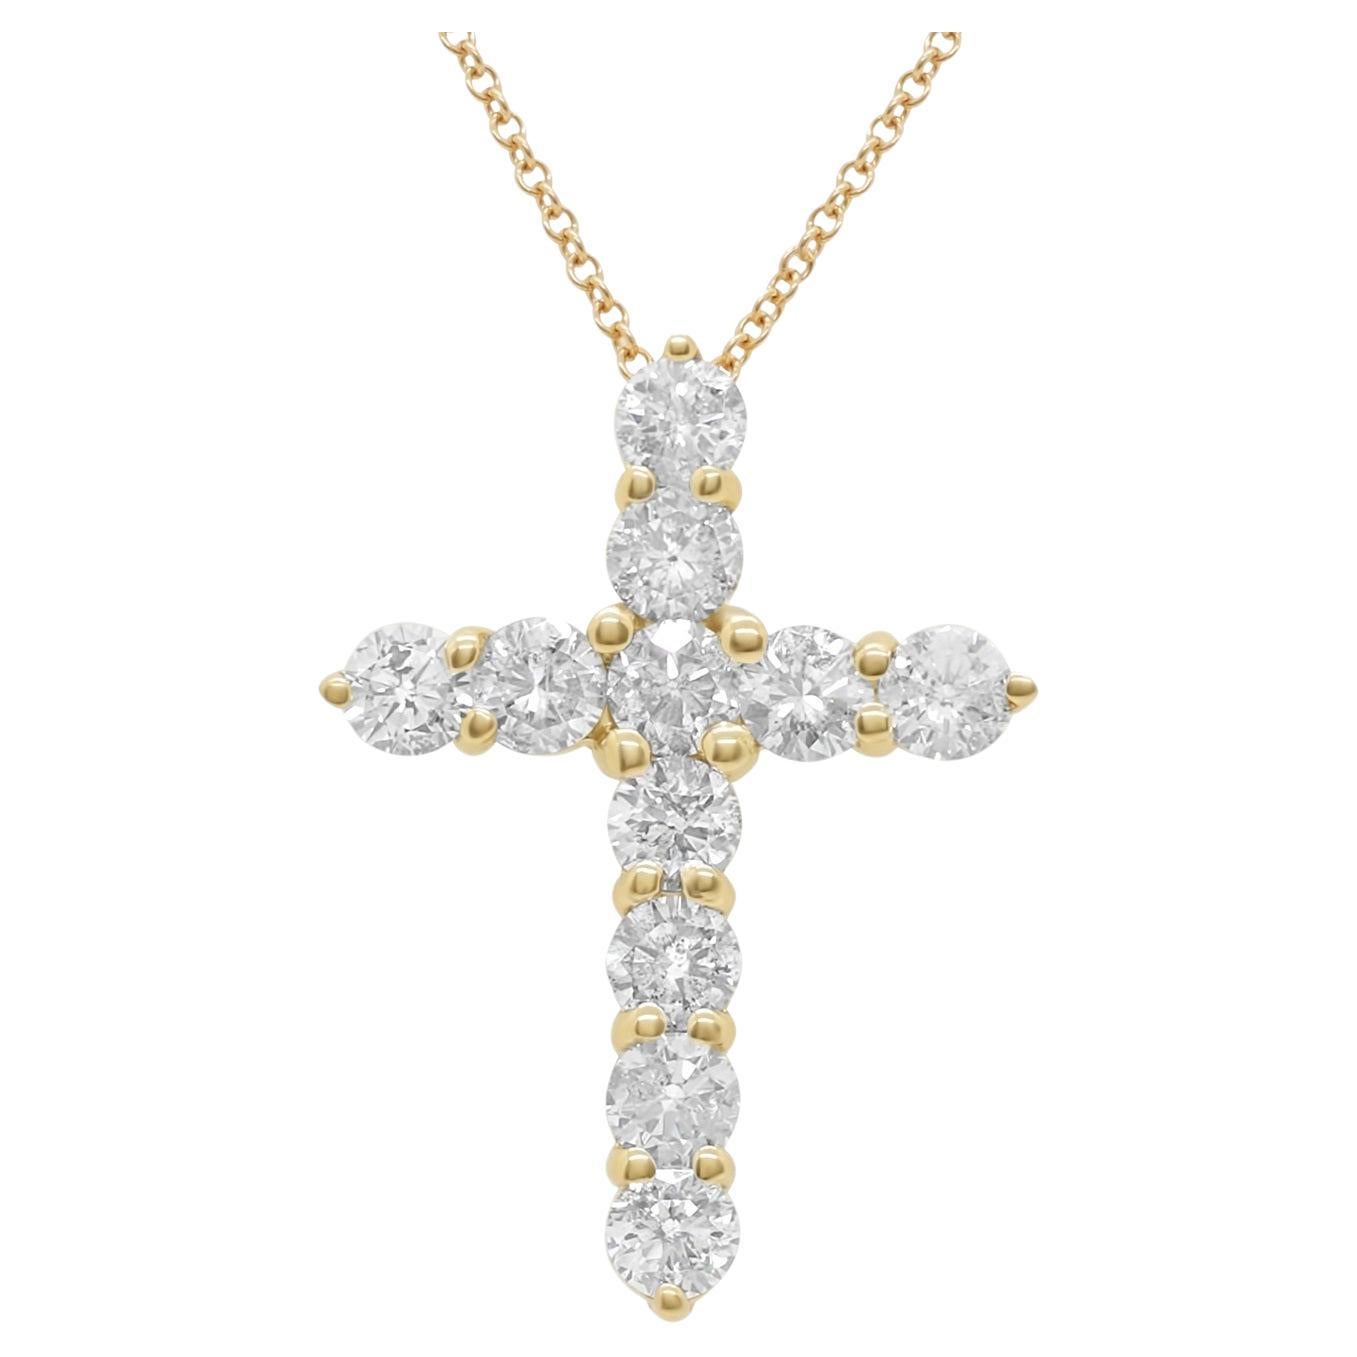 Diana M. 18 kt yellow gold, 1" diamond cross pendant adorned with 3.55 cts tw of For Sale